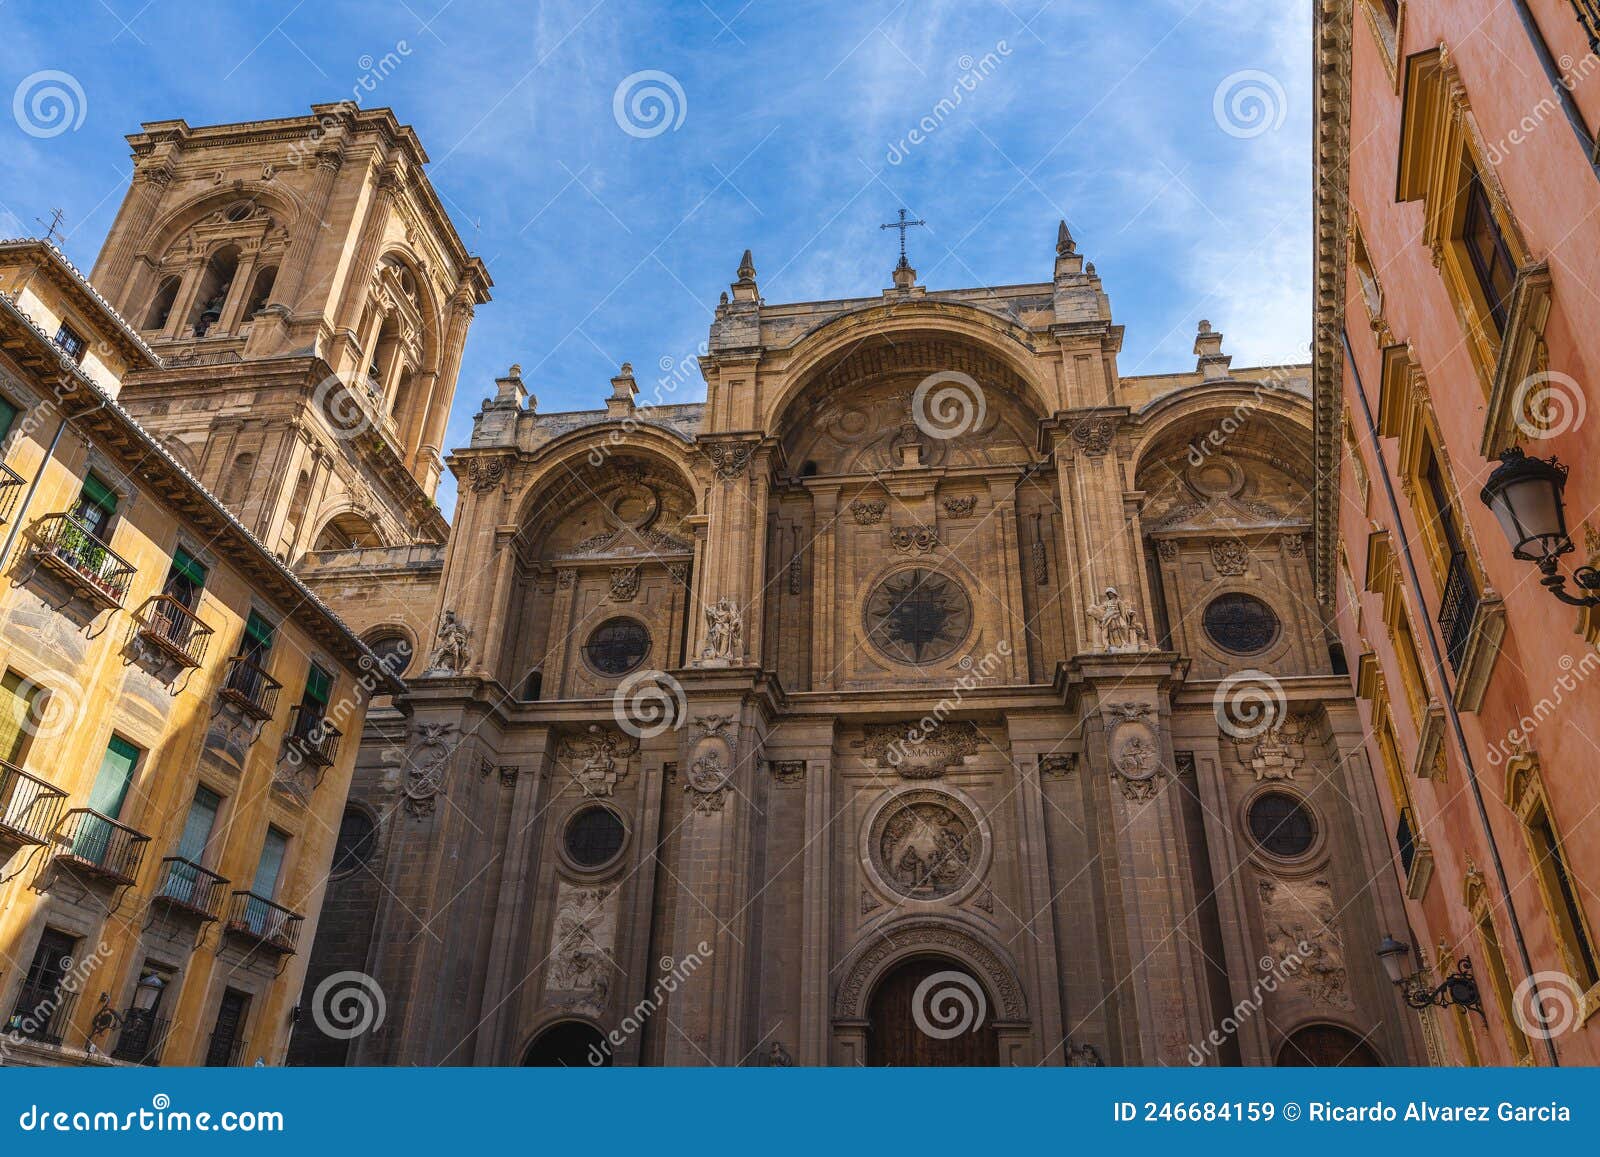 cathedral of the city of granada in andalucia, spain